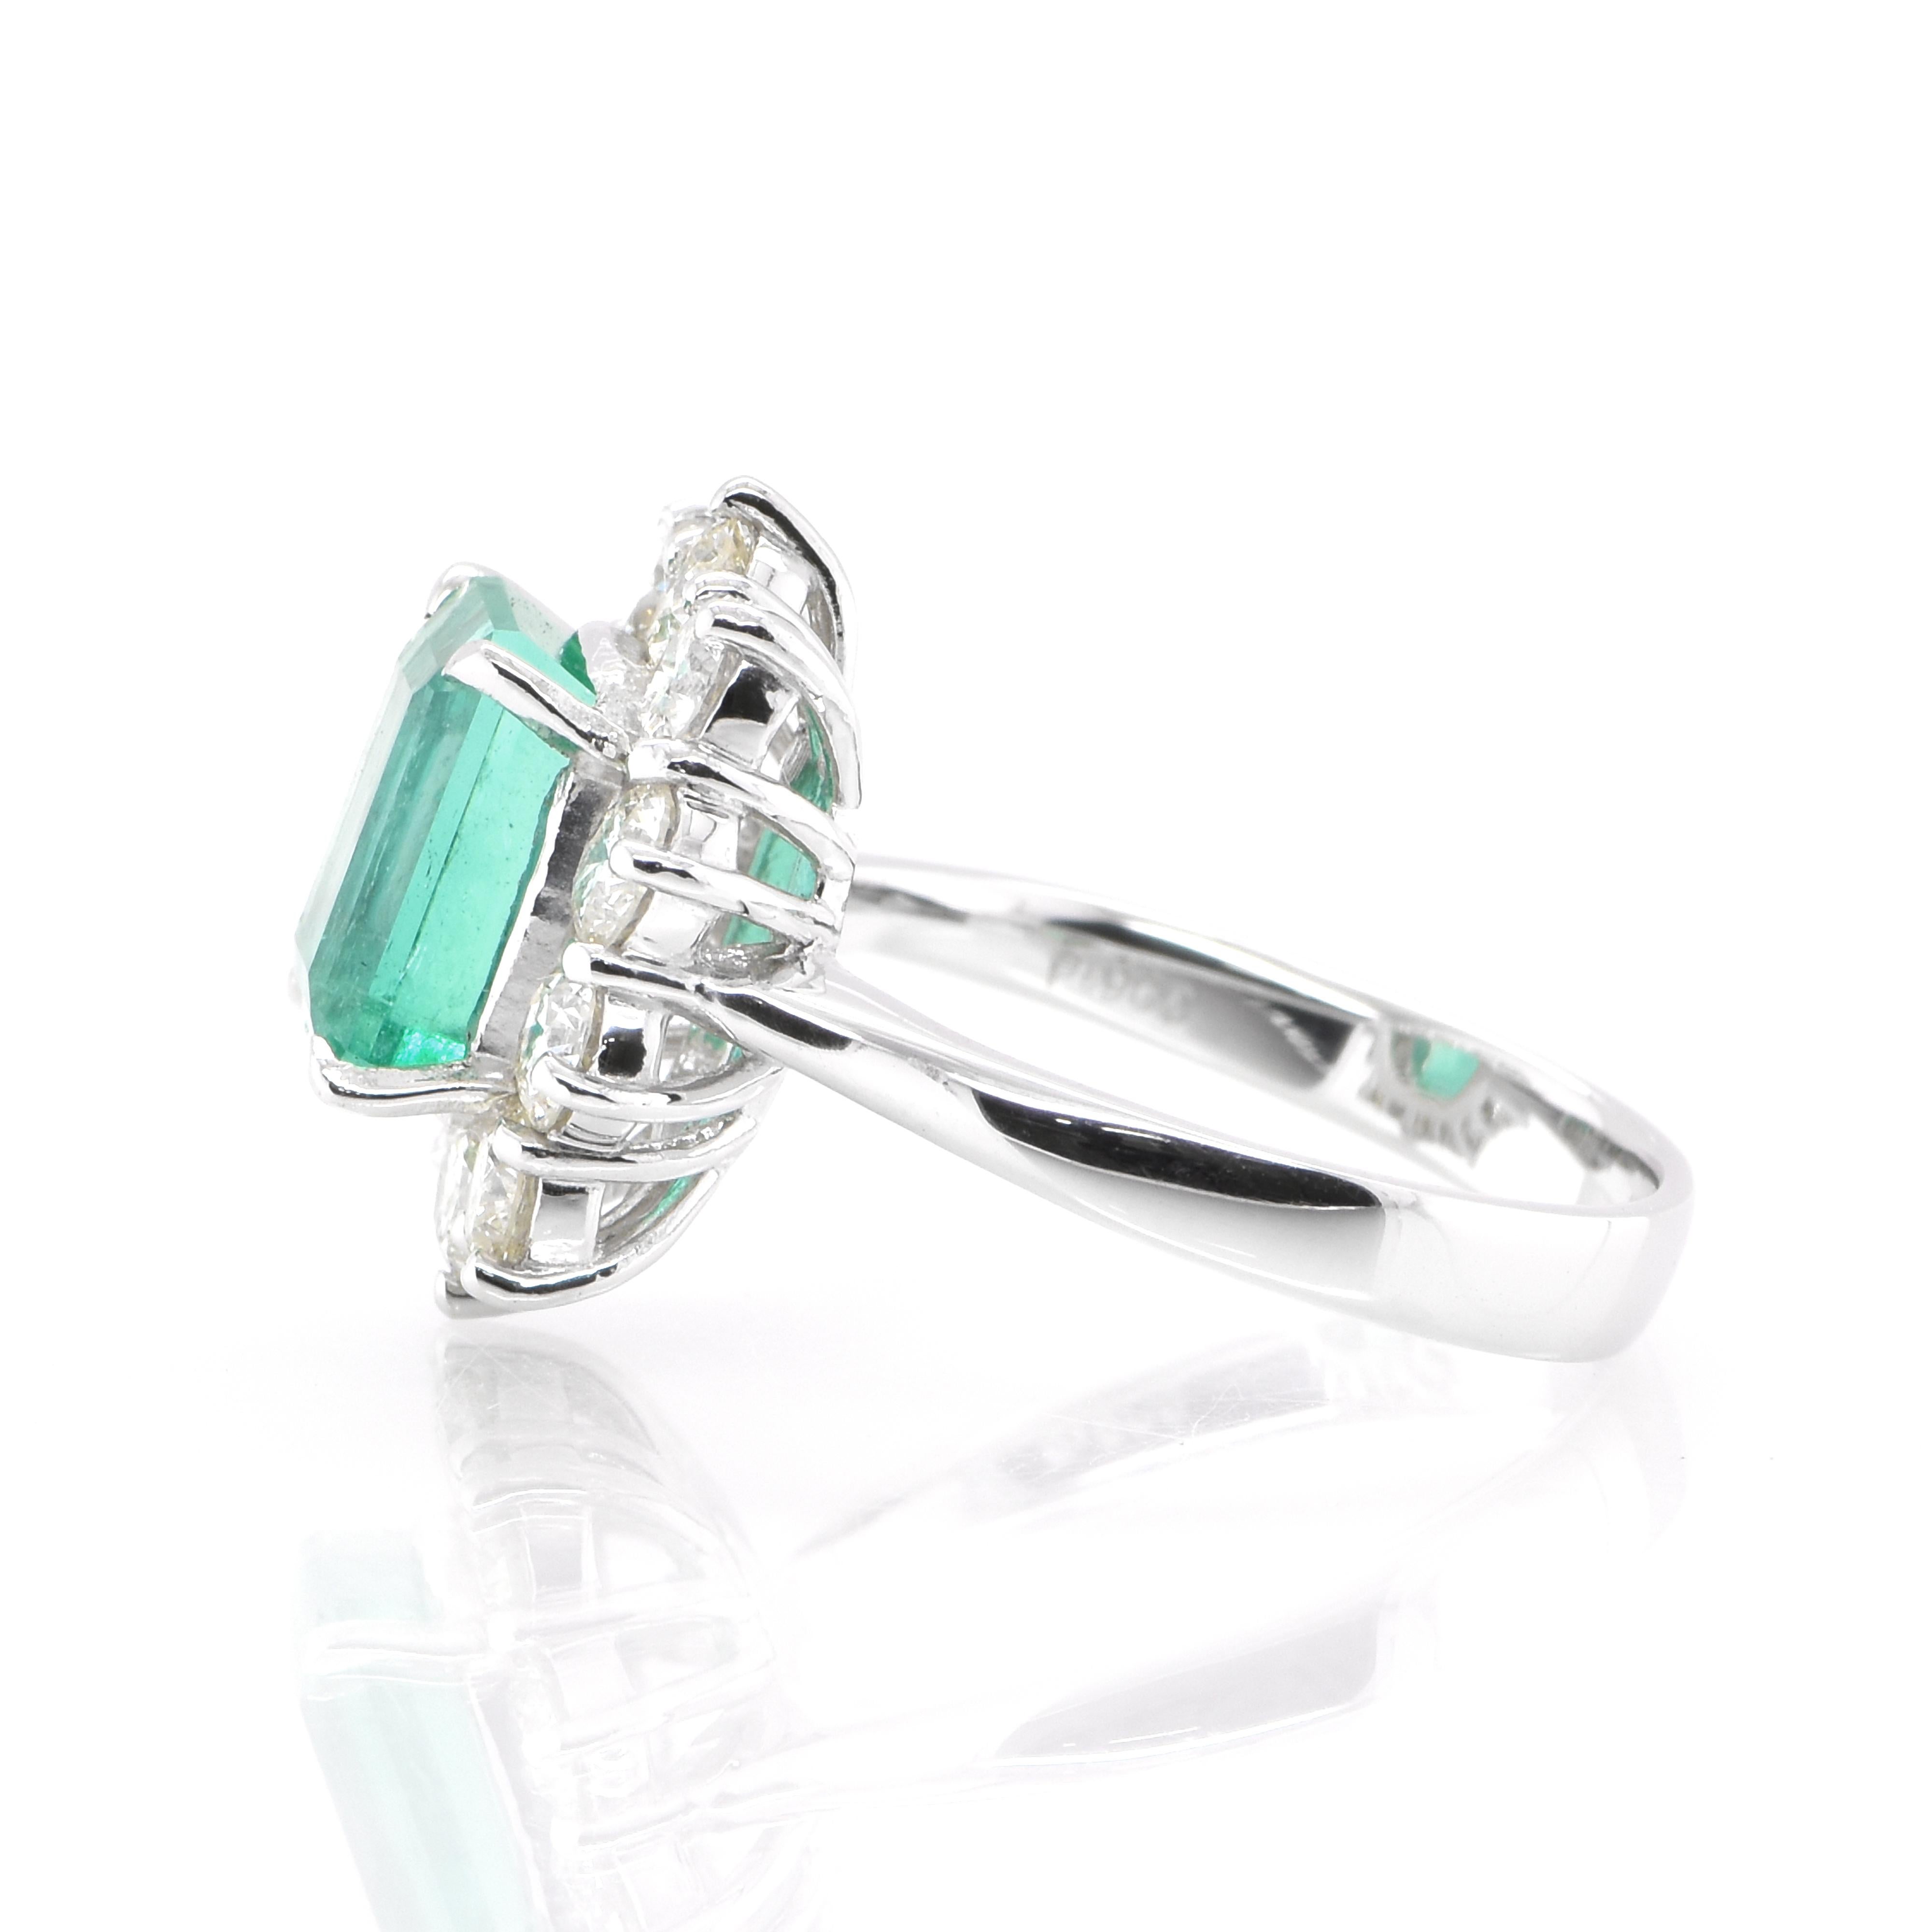 Women's 2.38 Carat Natural Colombian Emerald and Diamond Ring Set in Platinum